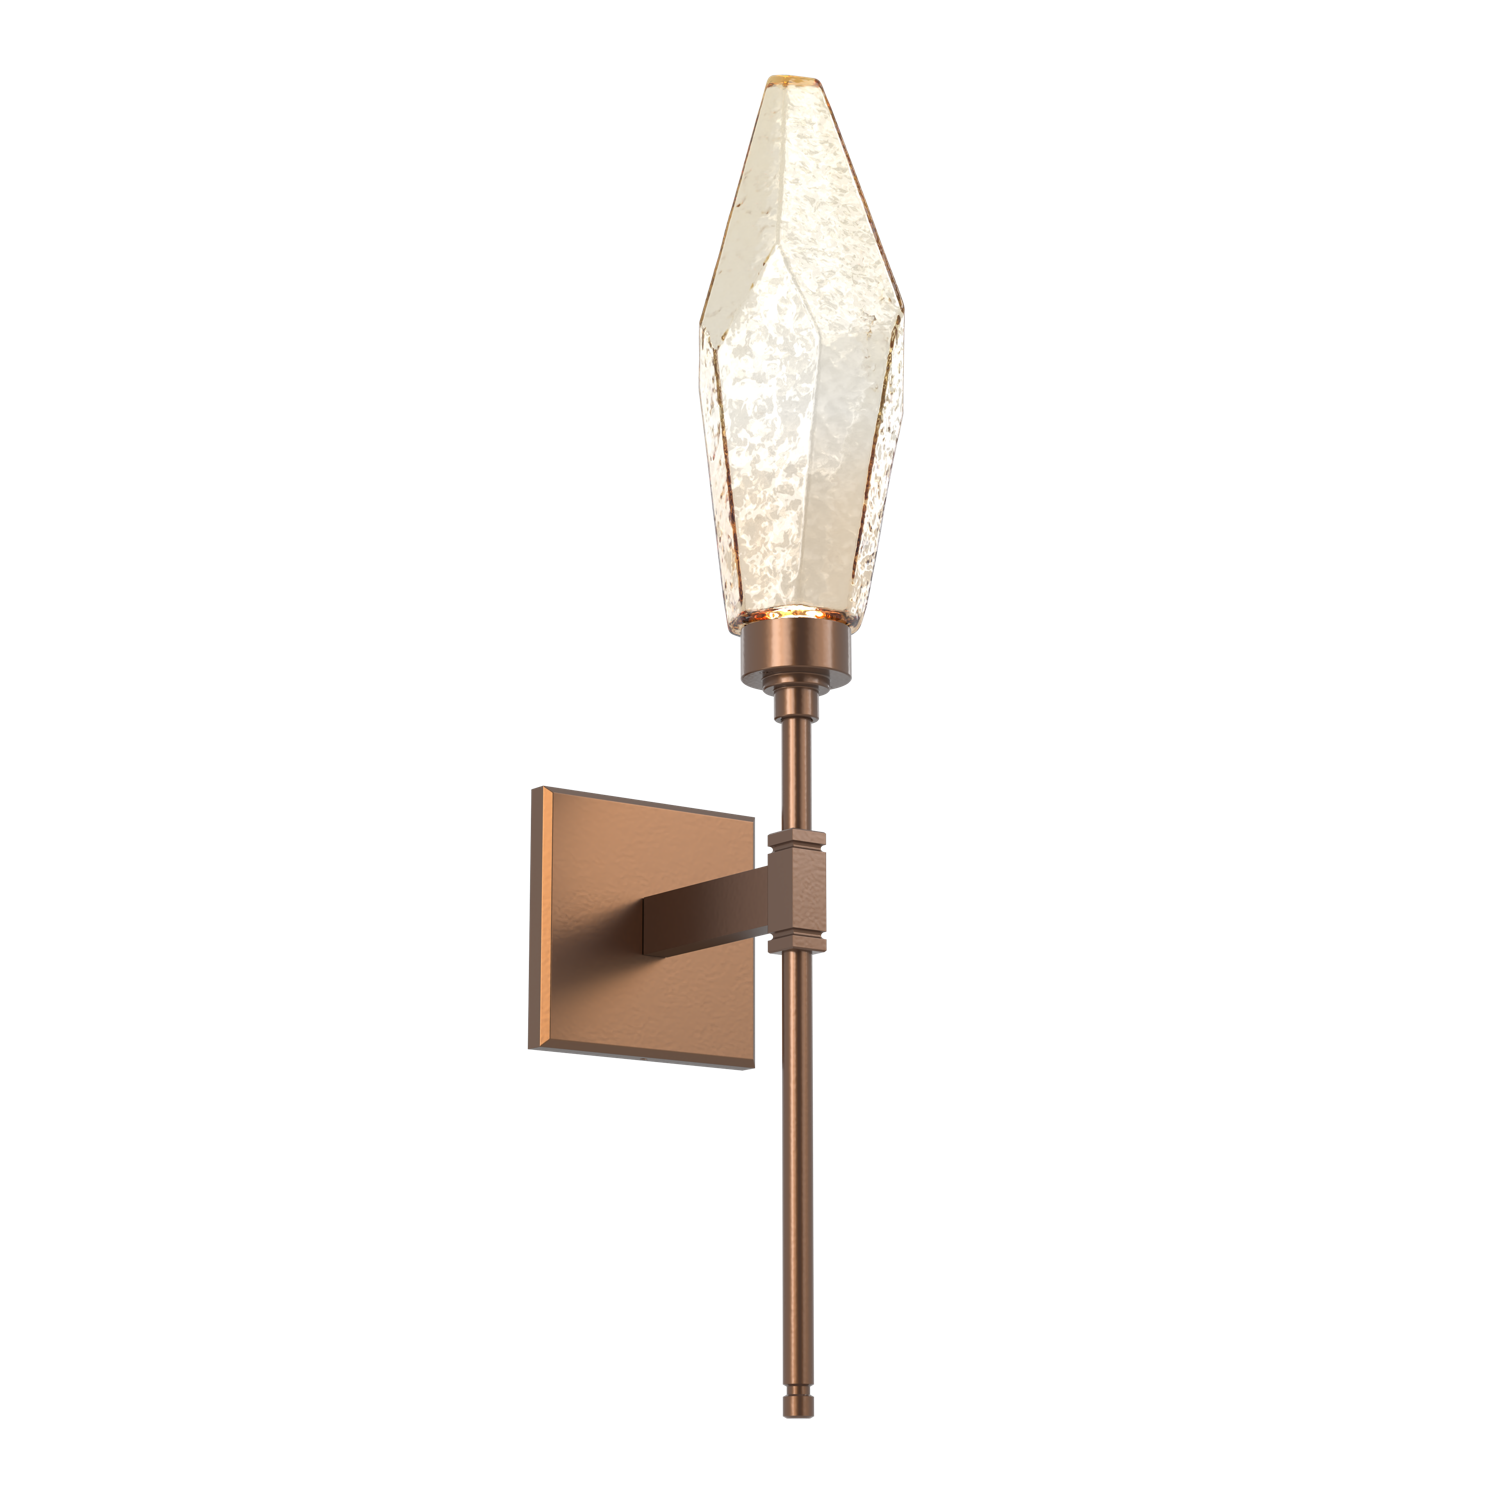 IDB0050-07-BB-CA-Hammerton-Studio-Rock-Crystal-belvedere-wall-sconce-with-burnished-bronze-finish-and-chilled-amber-blown-glass-shades-and-LED-lamping